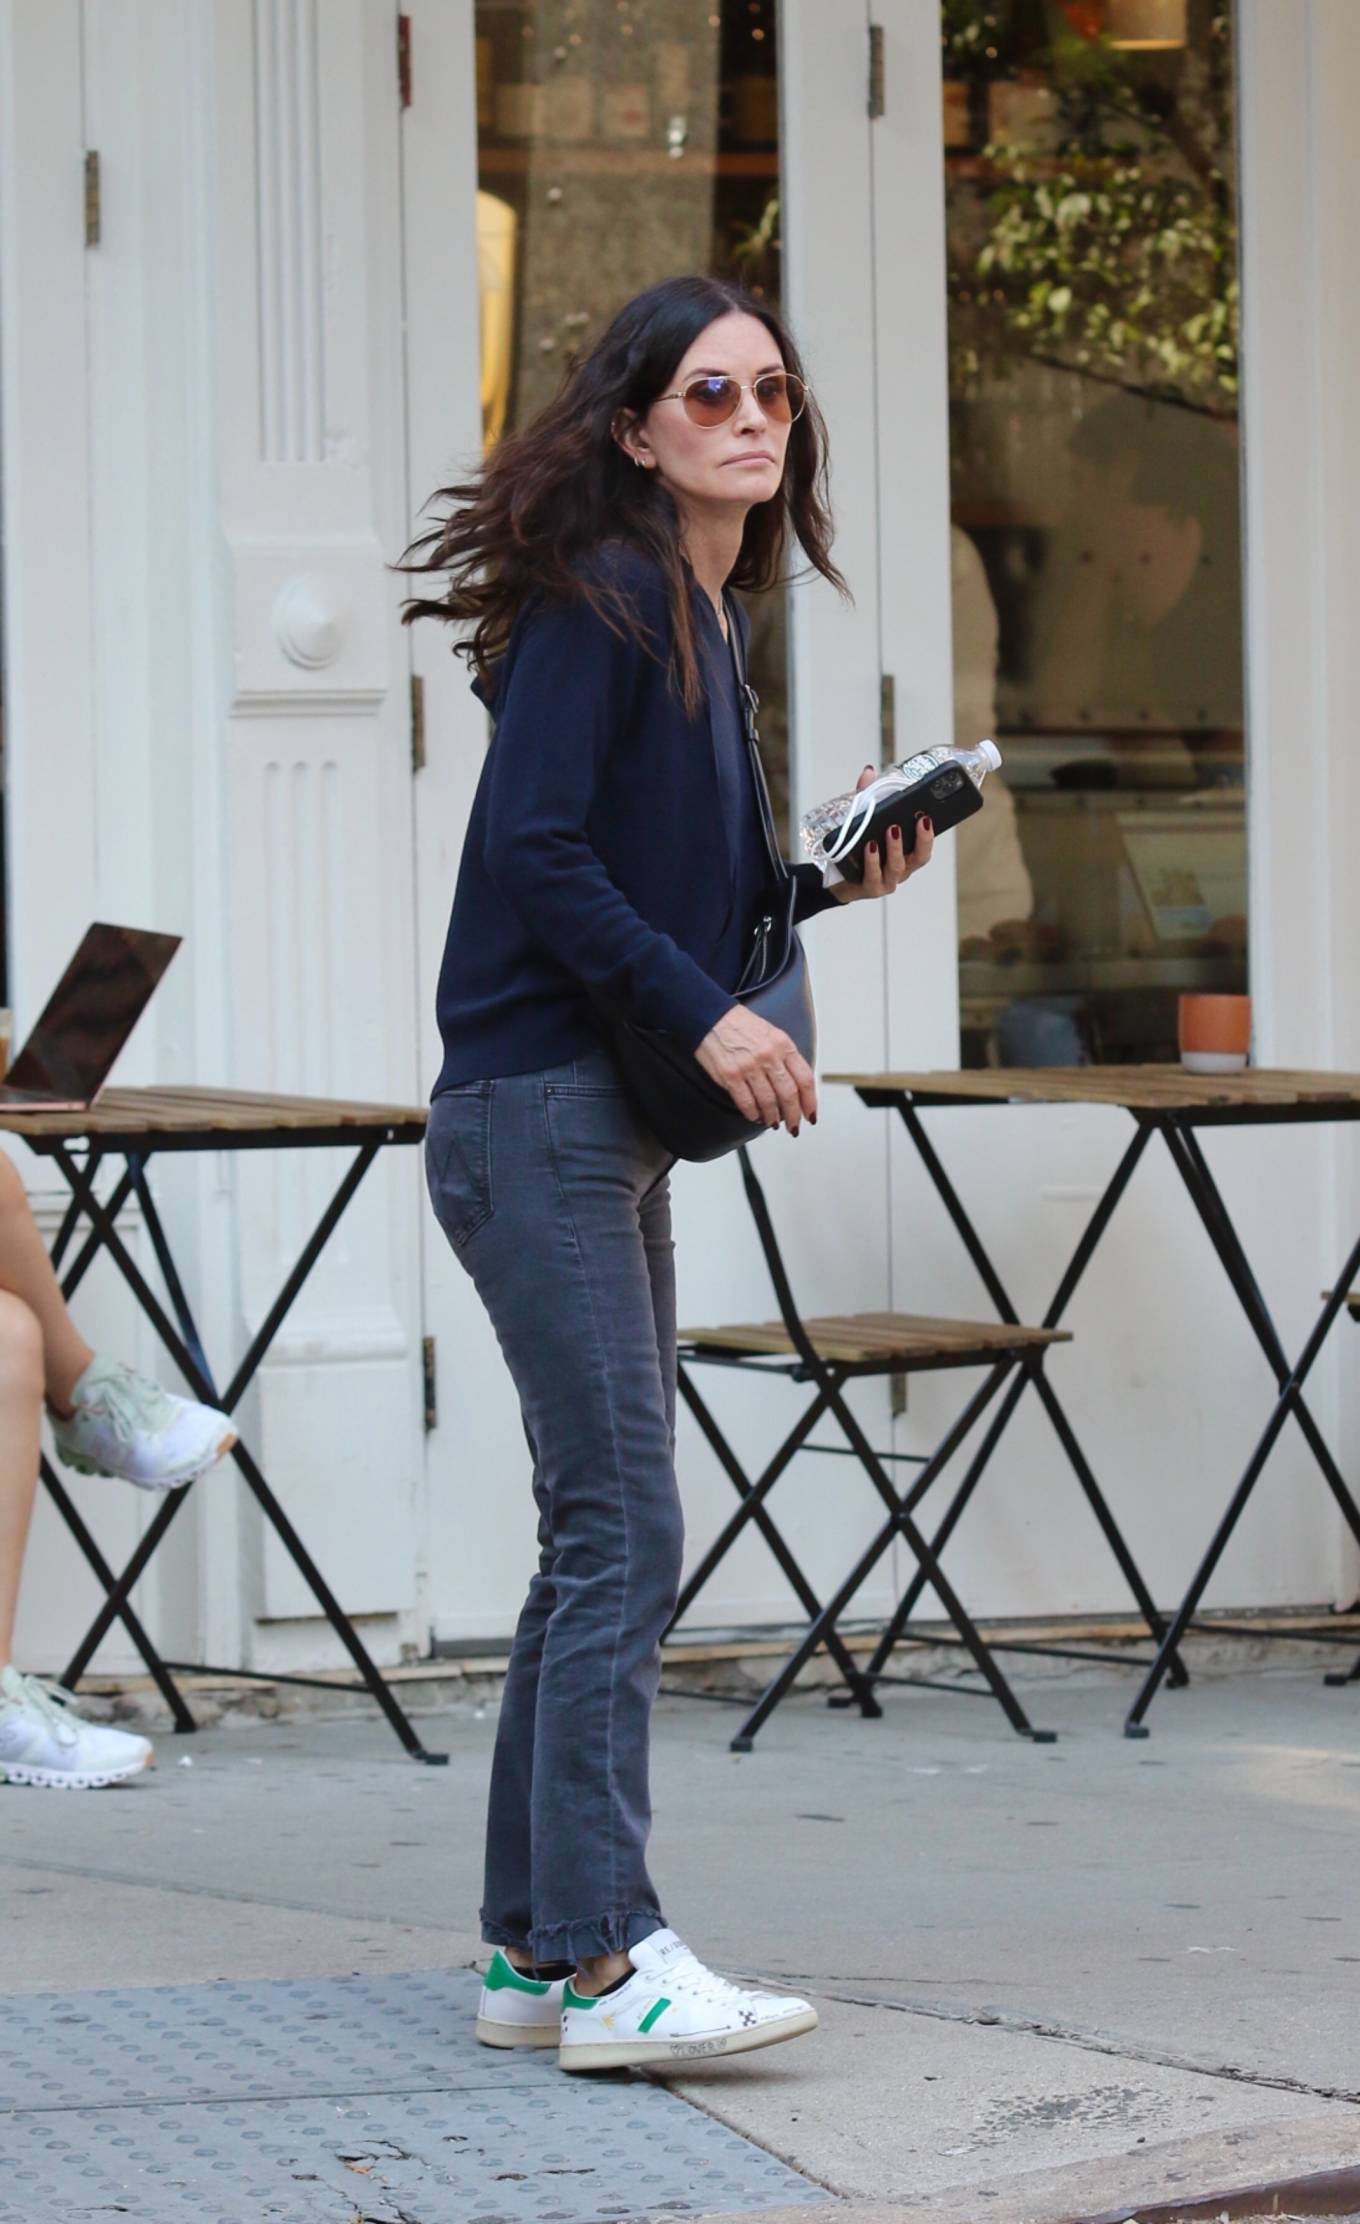 Courteney Cox 2021 : Courteney Cox – Steps out for lunch with friends in New York City-03